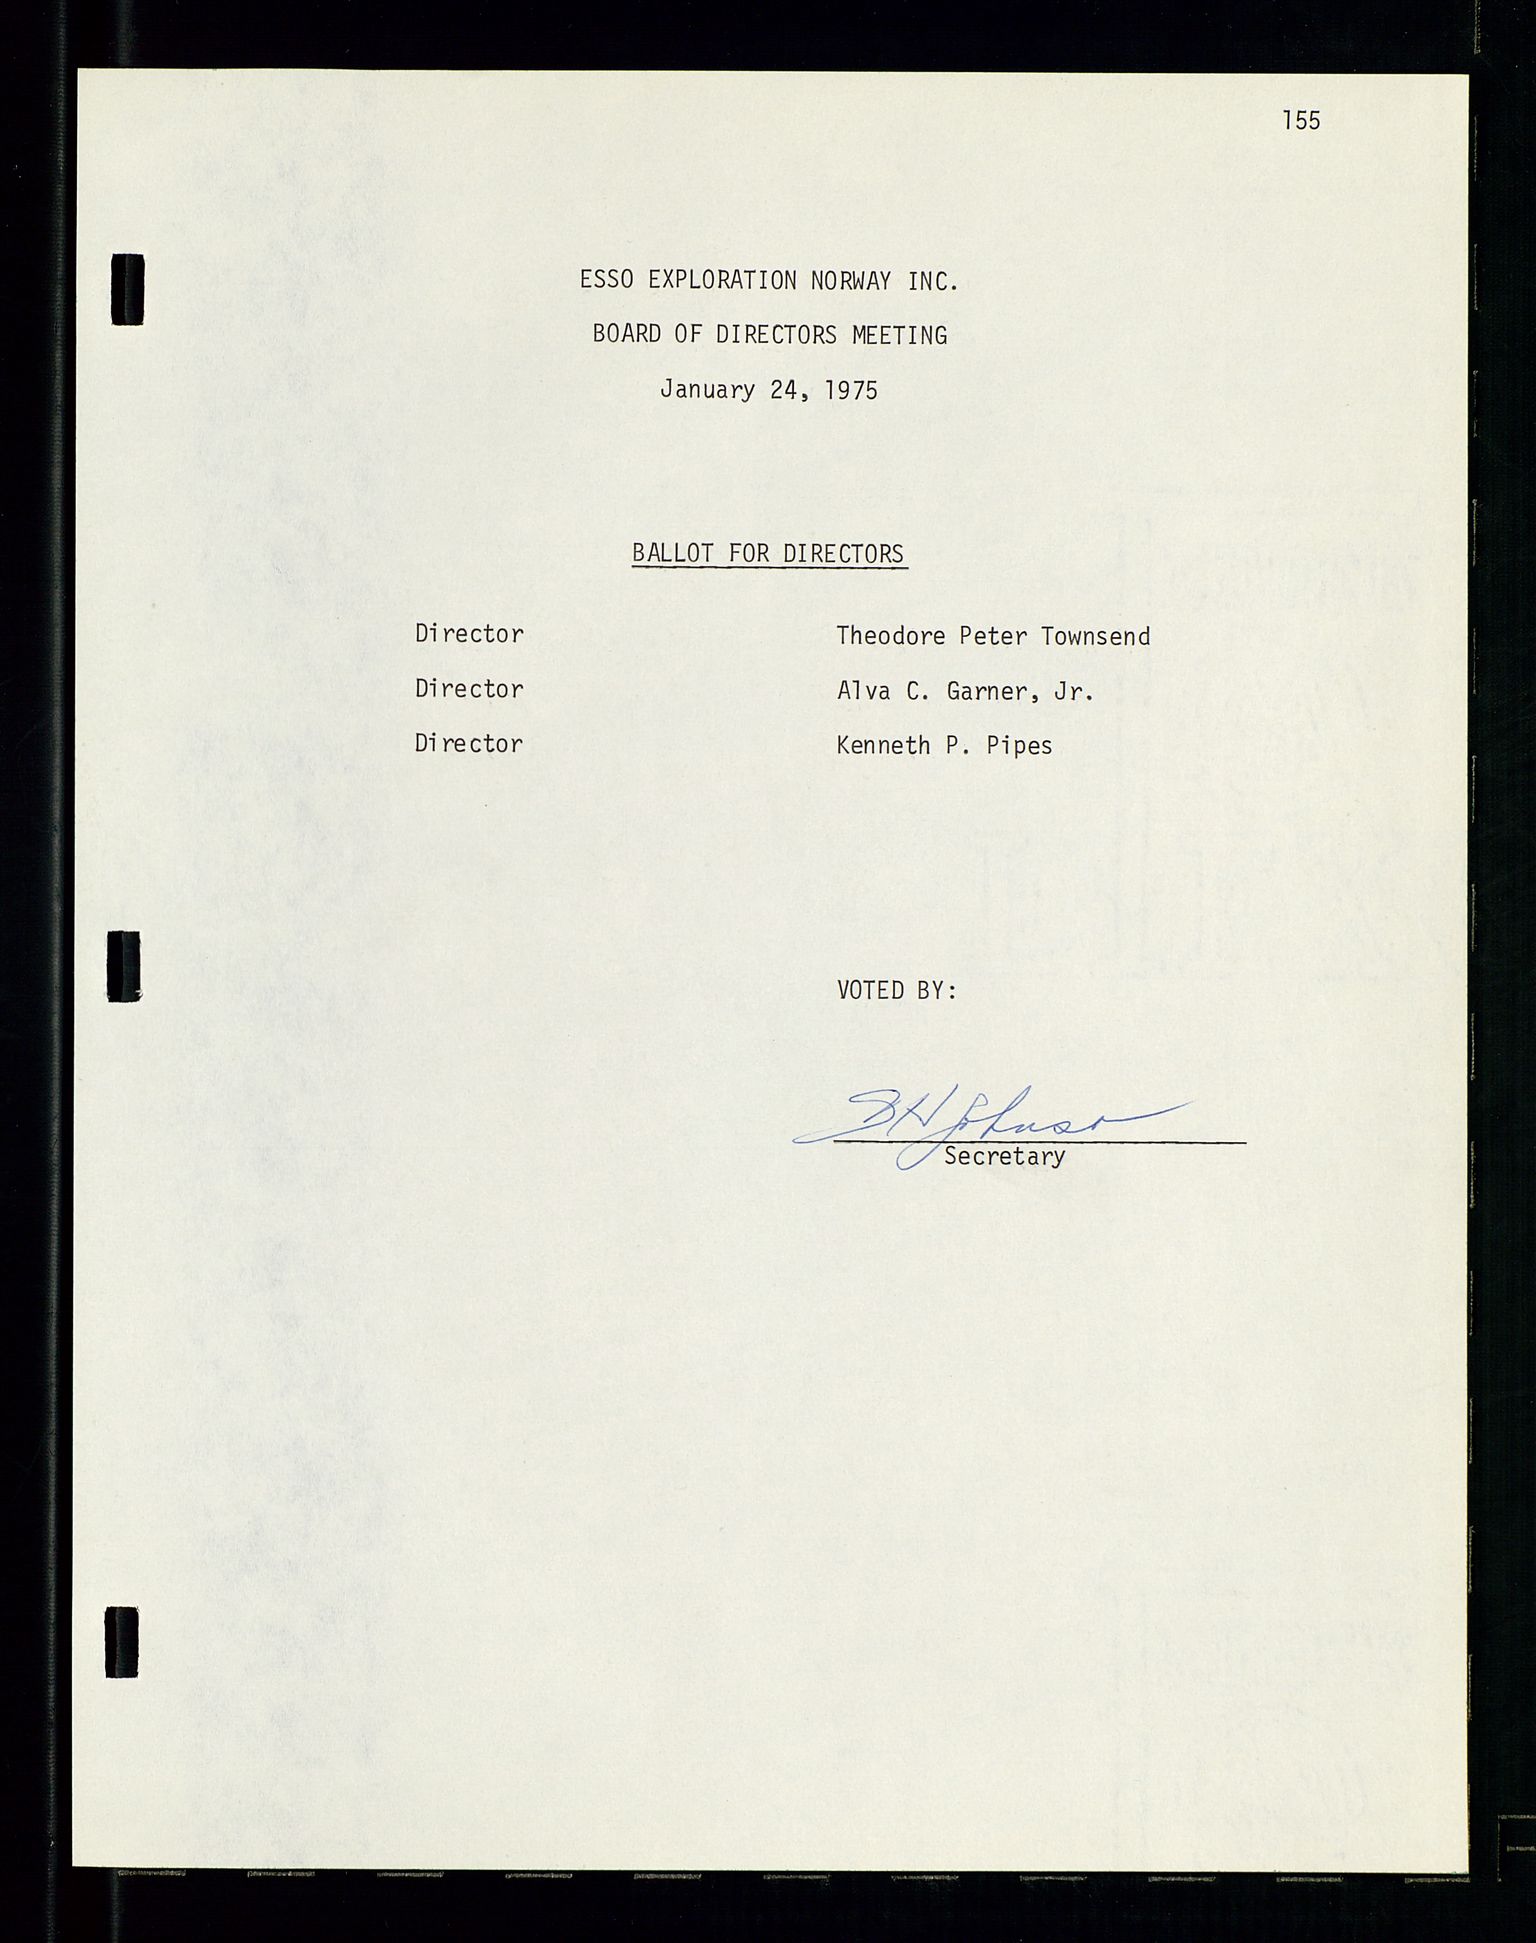 Pa 1512 - Esso Exploration and Production Norway Inc., SAST/A-101917/A/Aa/L0001/0001: Styredokumenter / Corporate records, By-Laws, Board meeting minutes, Incorporations, 1965-1975, s. 155